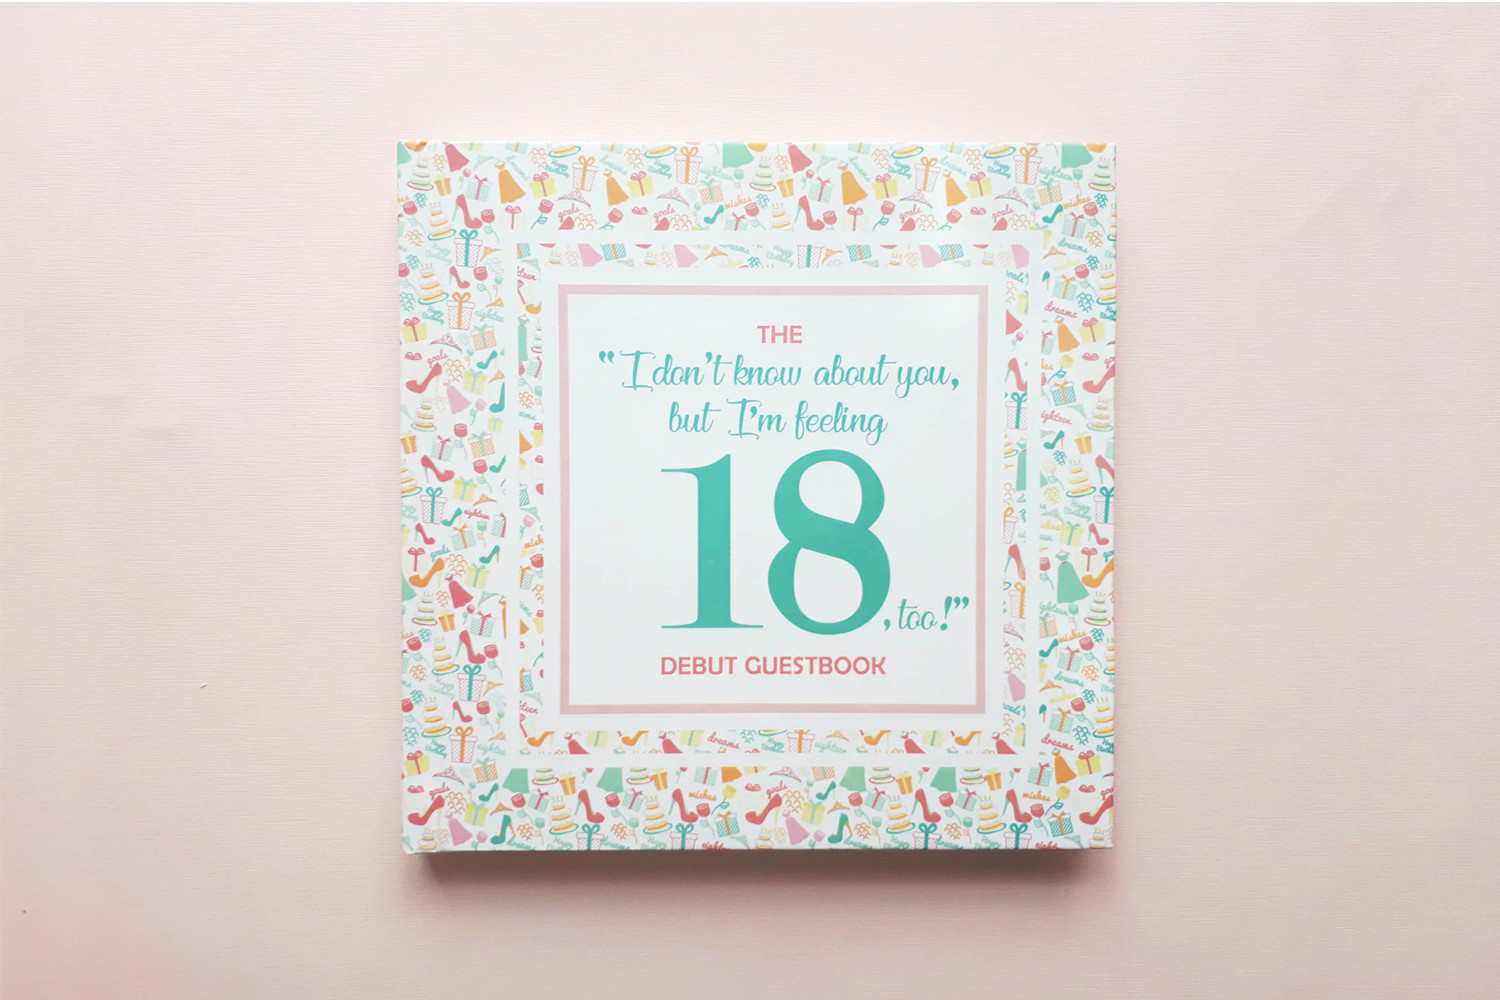 The "I don't know about you, but I'm feeling 18, too! Debut Guestbook